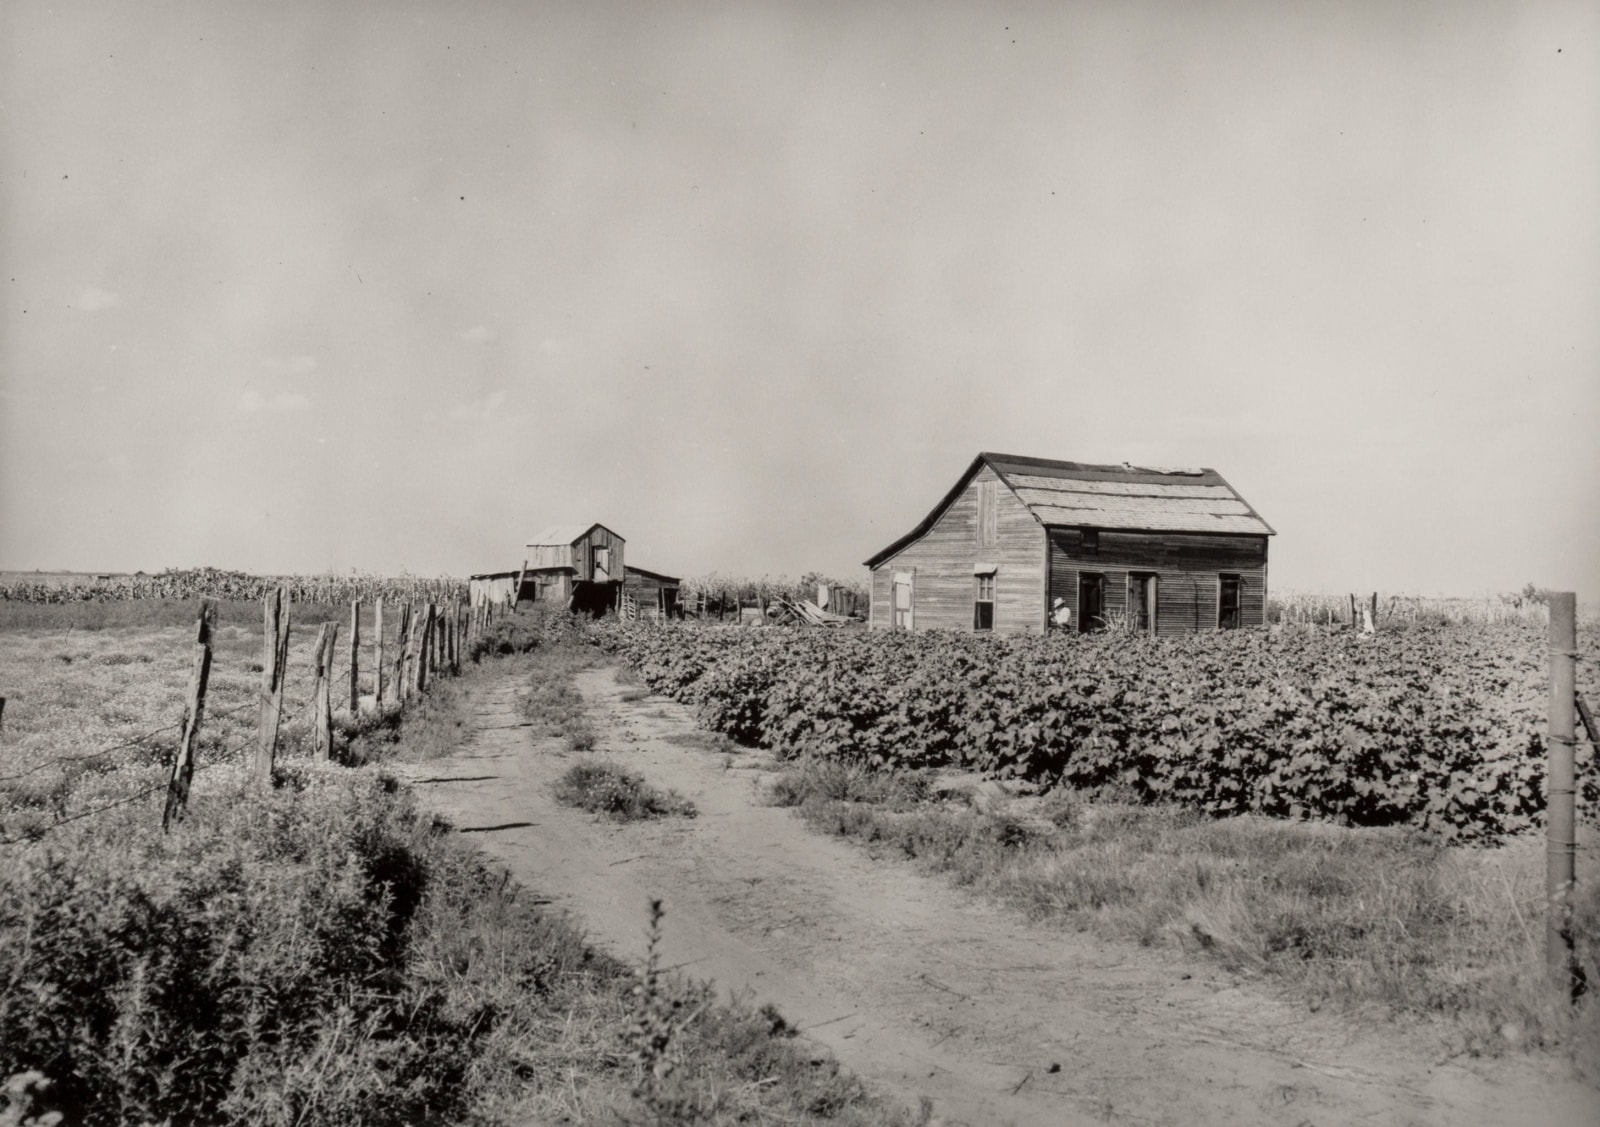 Two small wooden houses on a dusty farm photographed in black and white